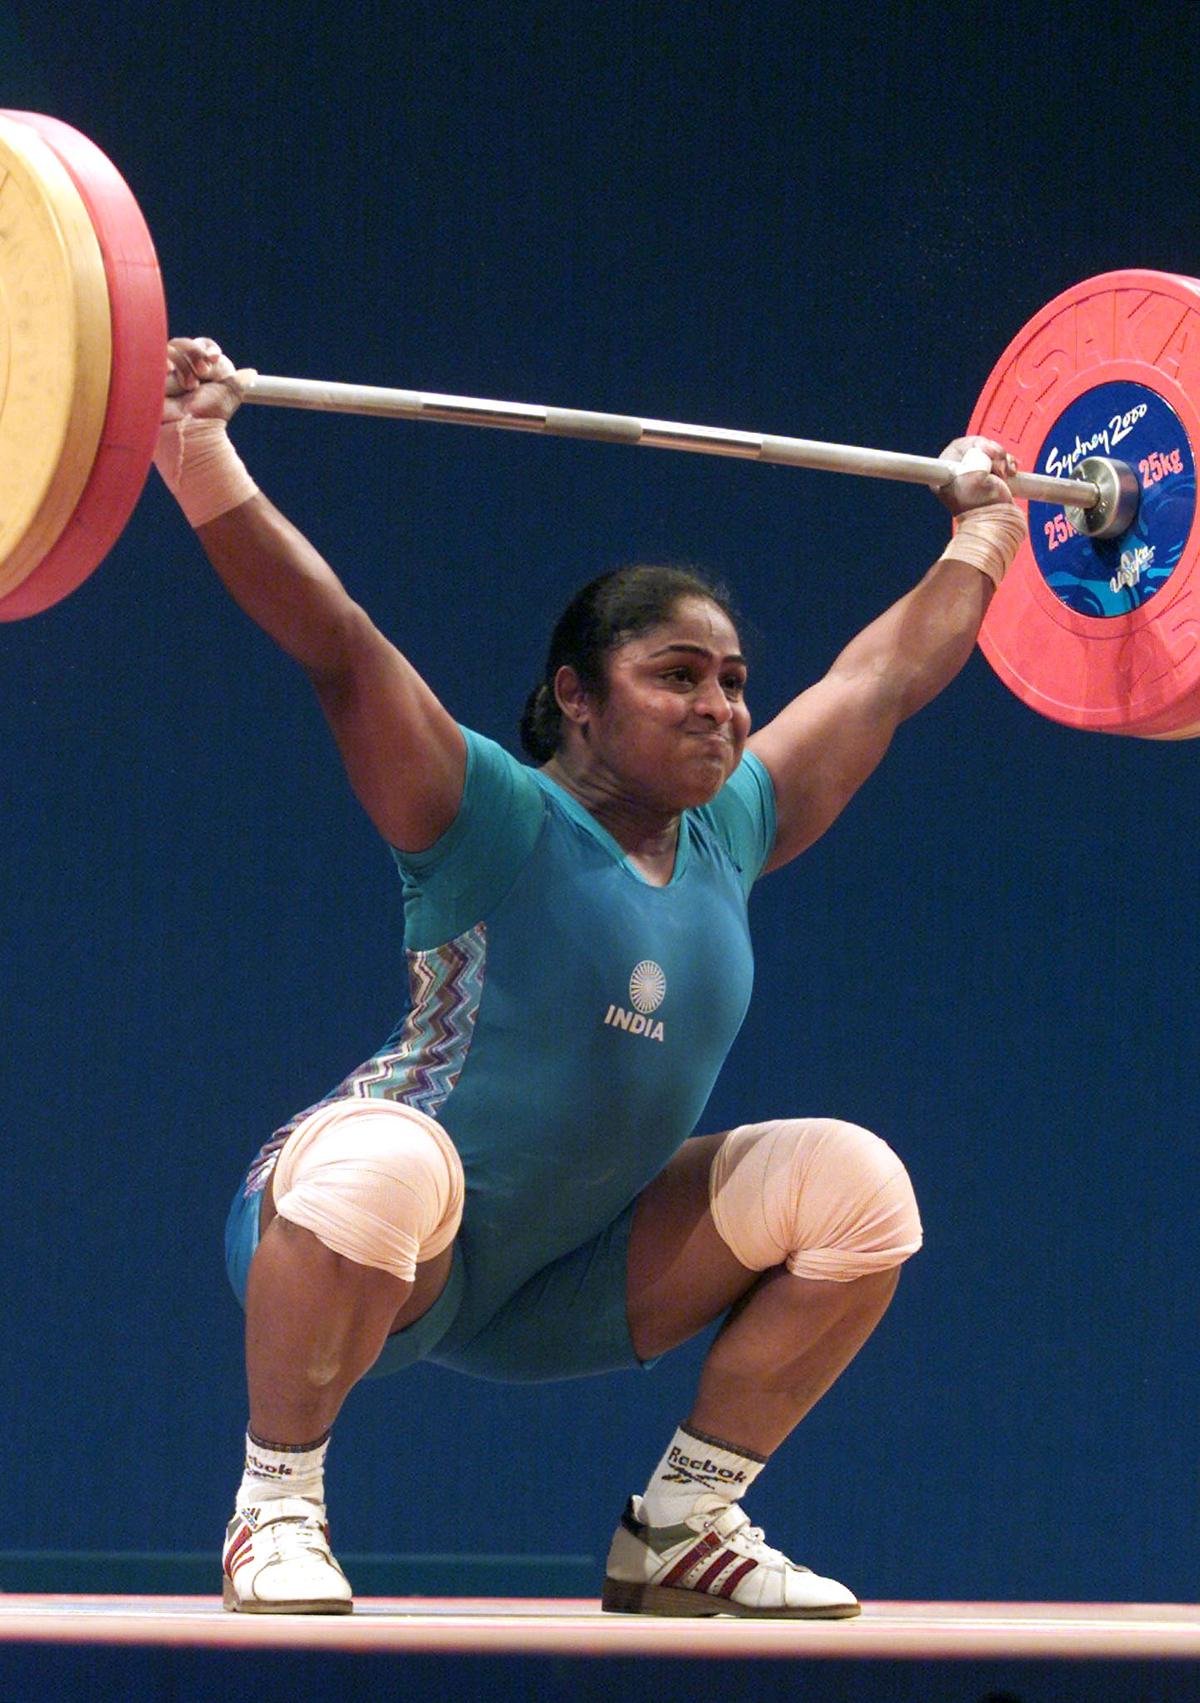 Karnam Malleswari lifts 105 kg in the women’s 69kg weightlifting snatch during the Sydney Olympics on September 19, 2000, a feat that won her the bronze medal.  